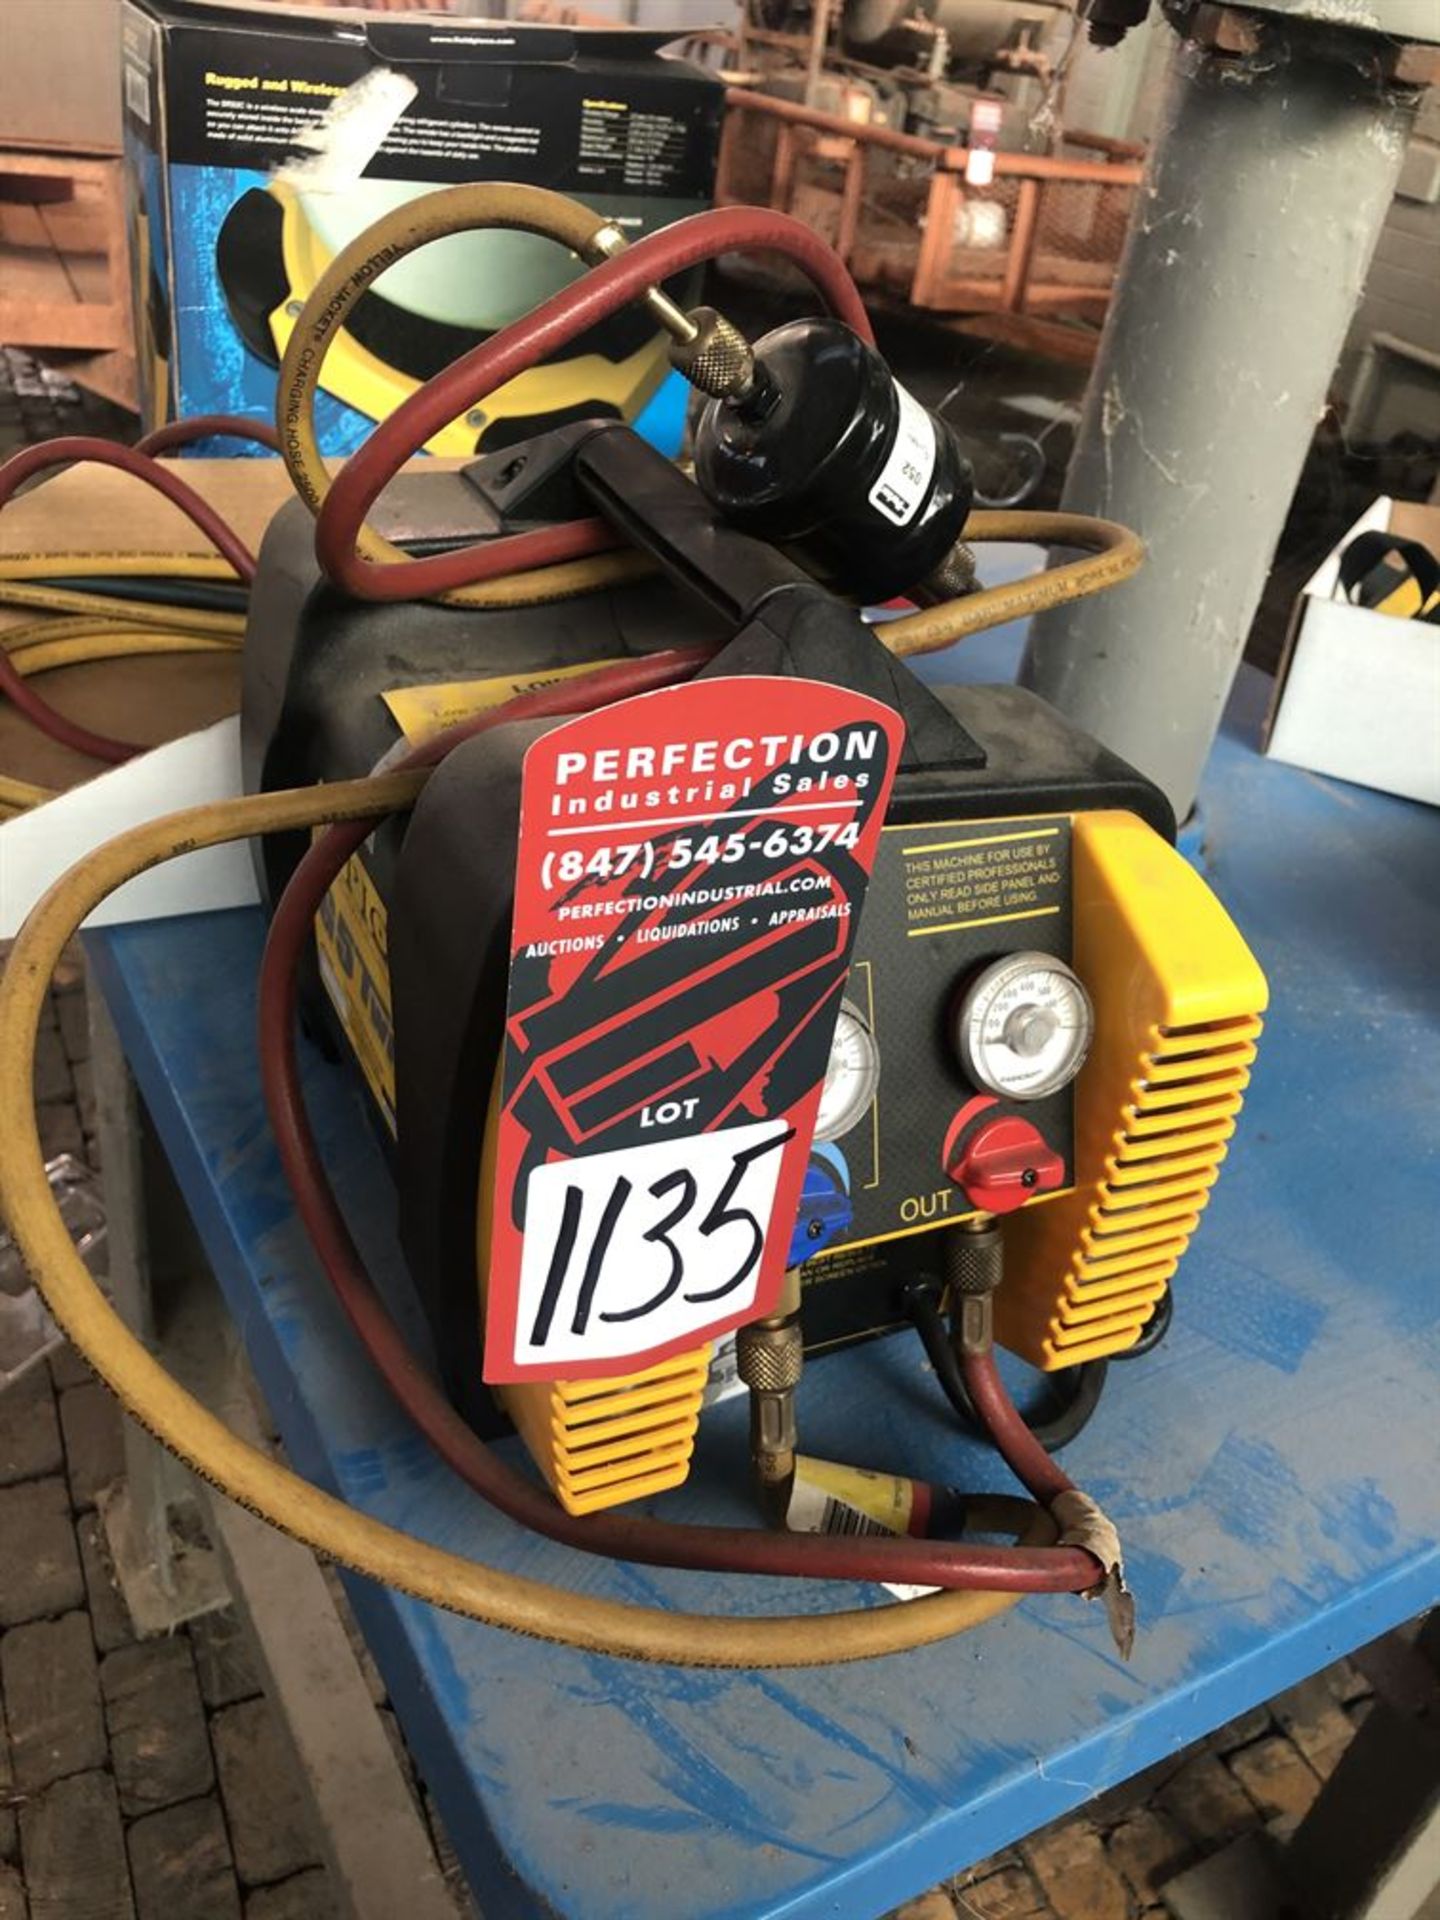 Lot Comprising of A/C Equipment, Including (1) Appion G5 Twin Refrigerant Recovery Unit, (1)